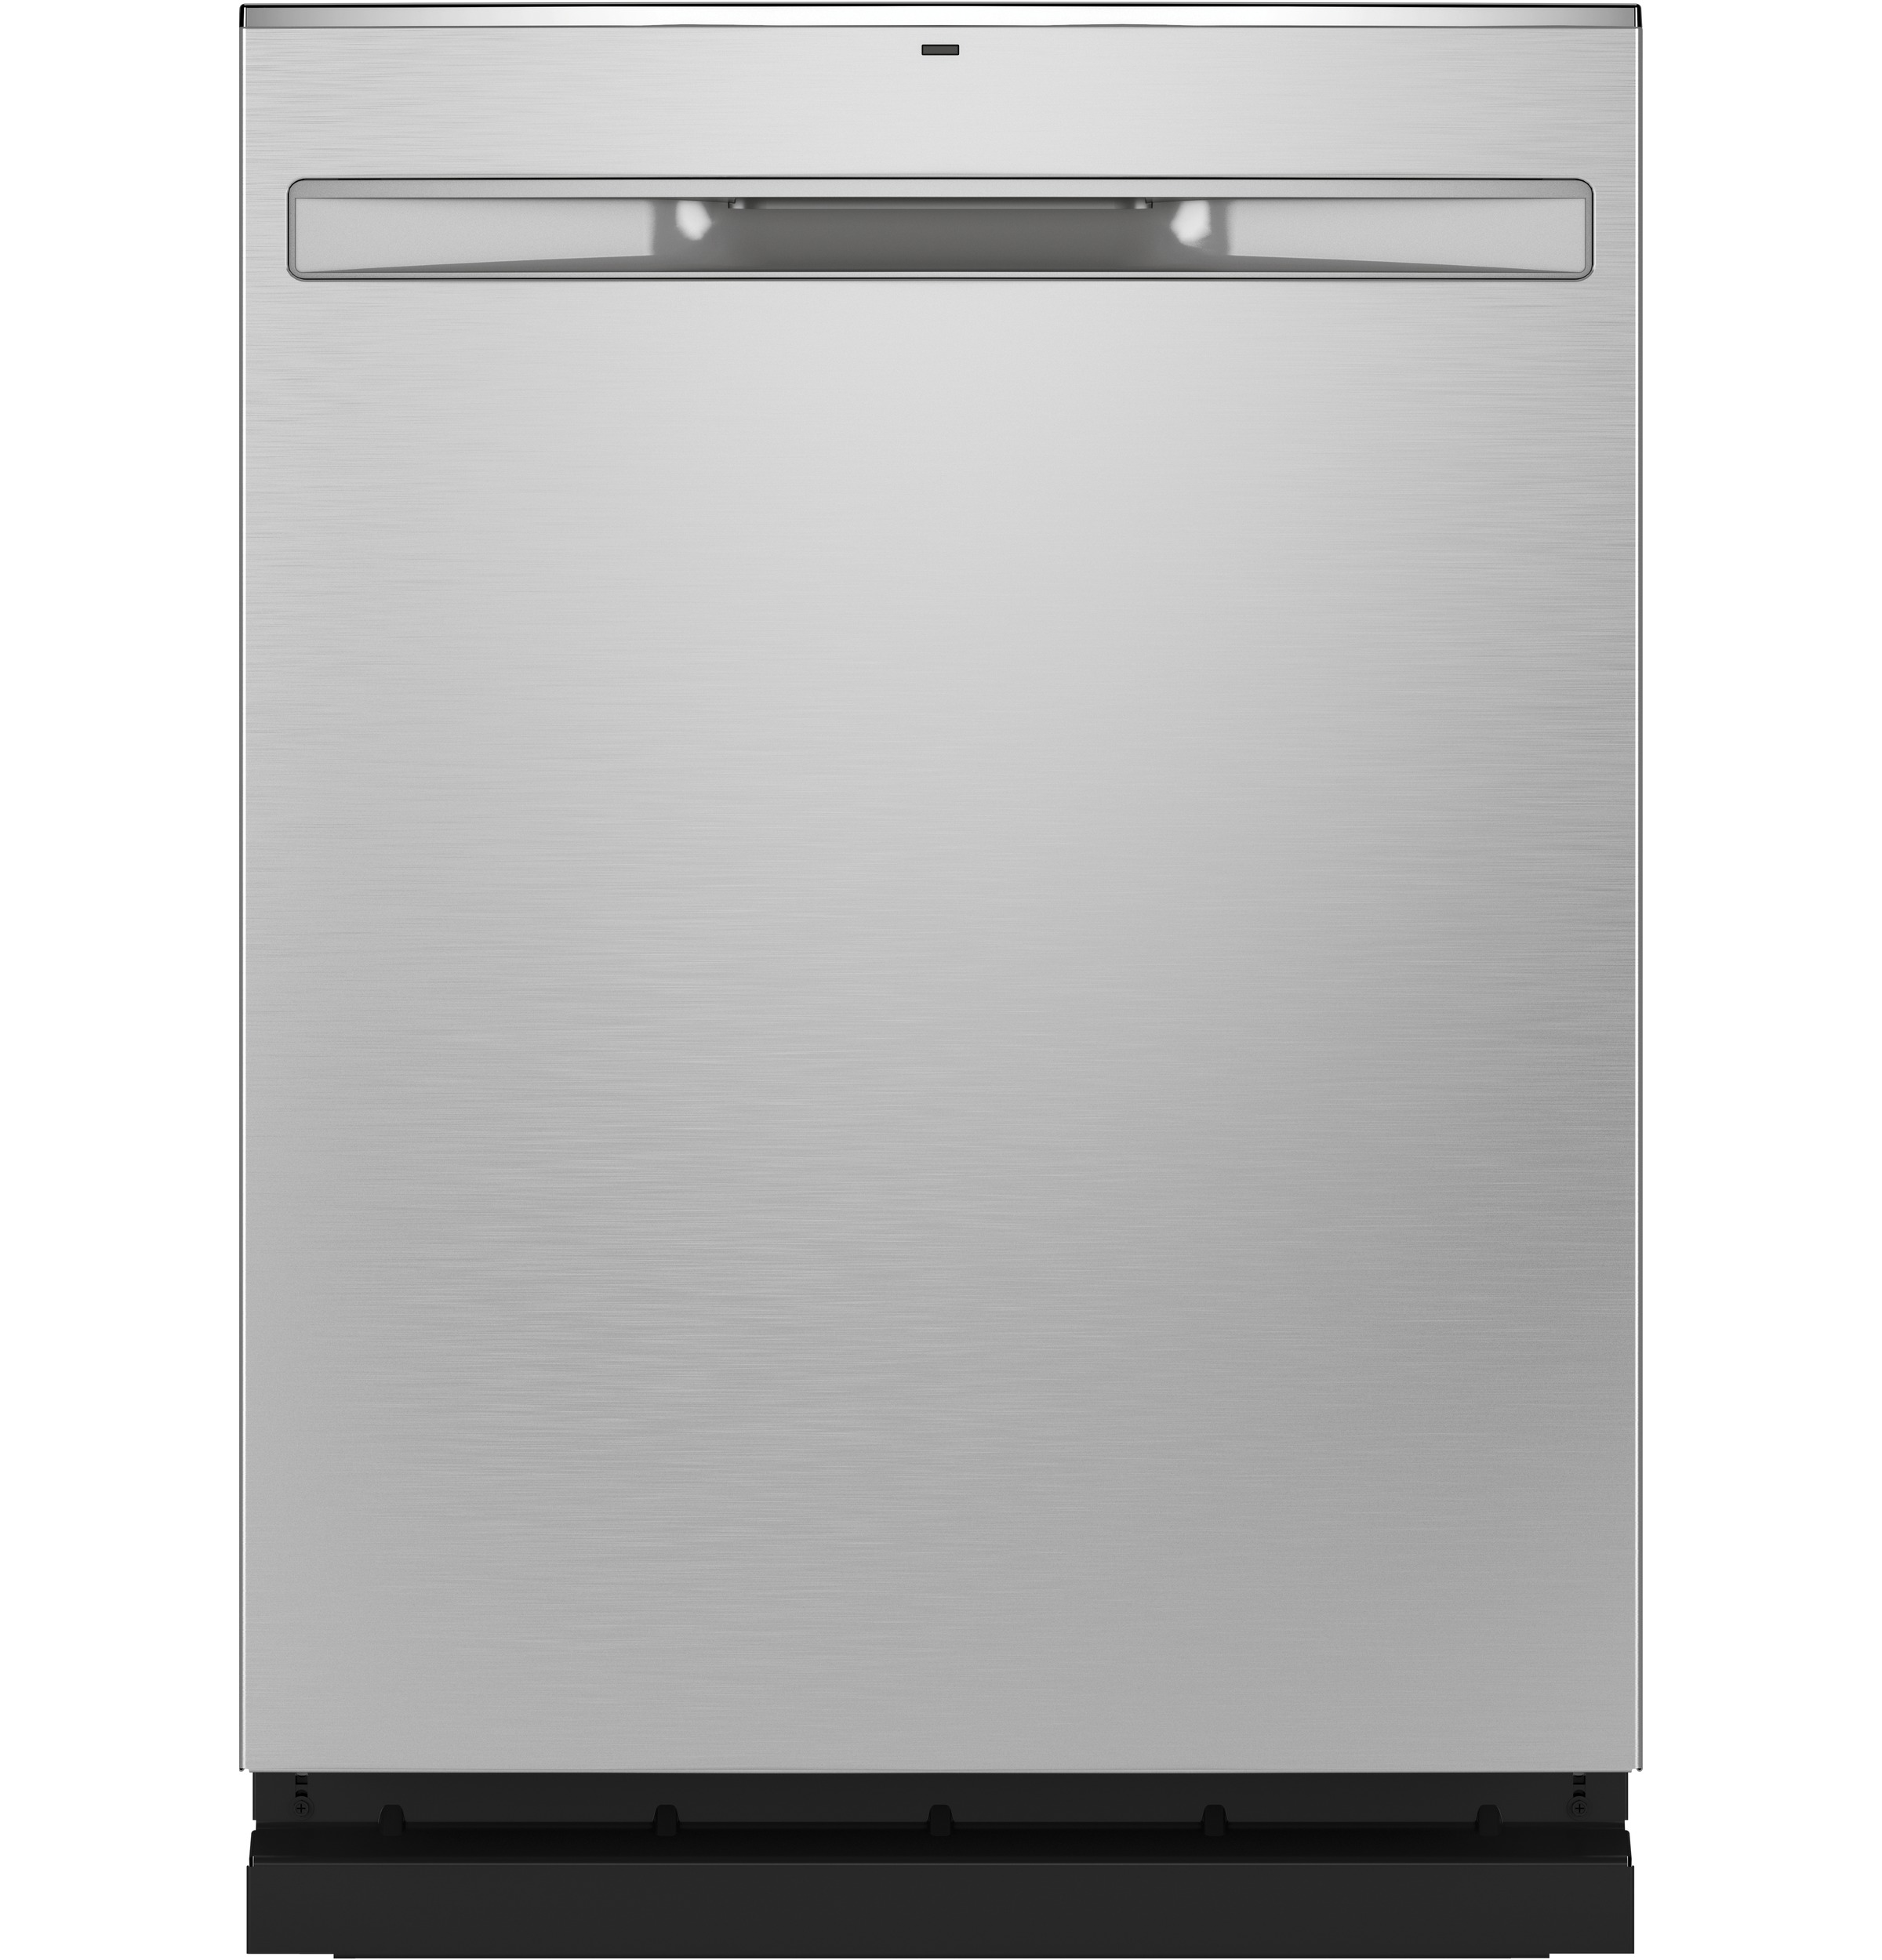 GE® ENERGY STAR® Fingerprint Resistant Top Control with Stainless Steel Interior Dishwasher with Sanitize Cycle & Dry Boost with Fan Assist